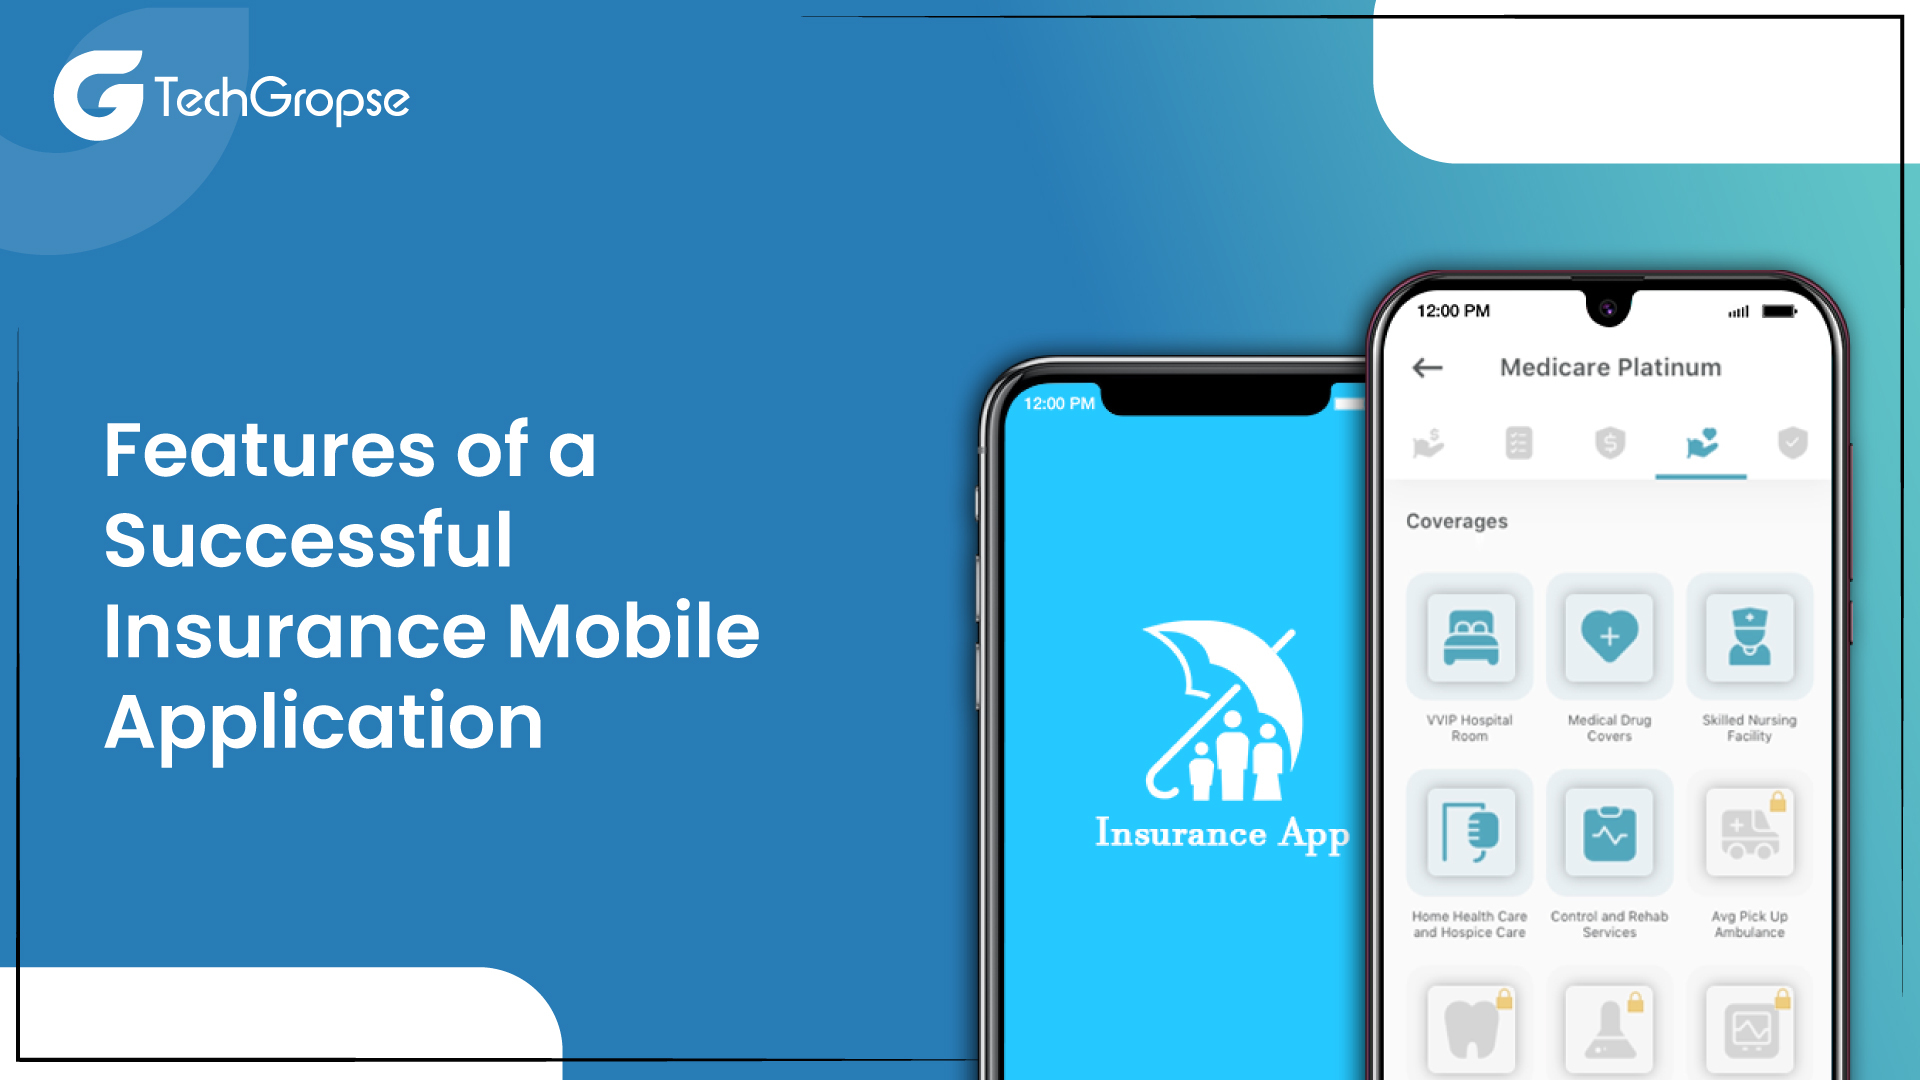 Features of a Successful Insurance Mobile Application